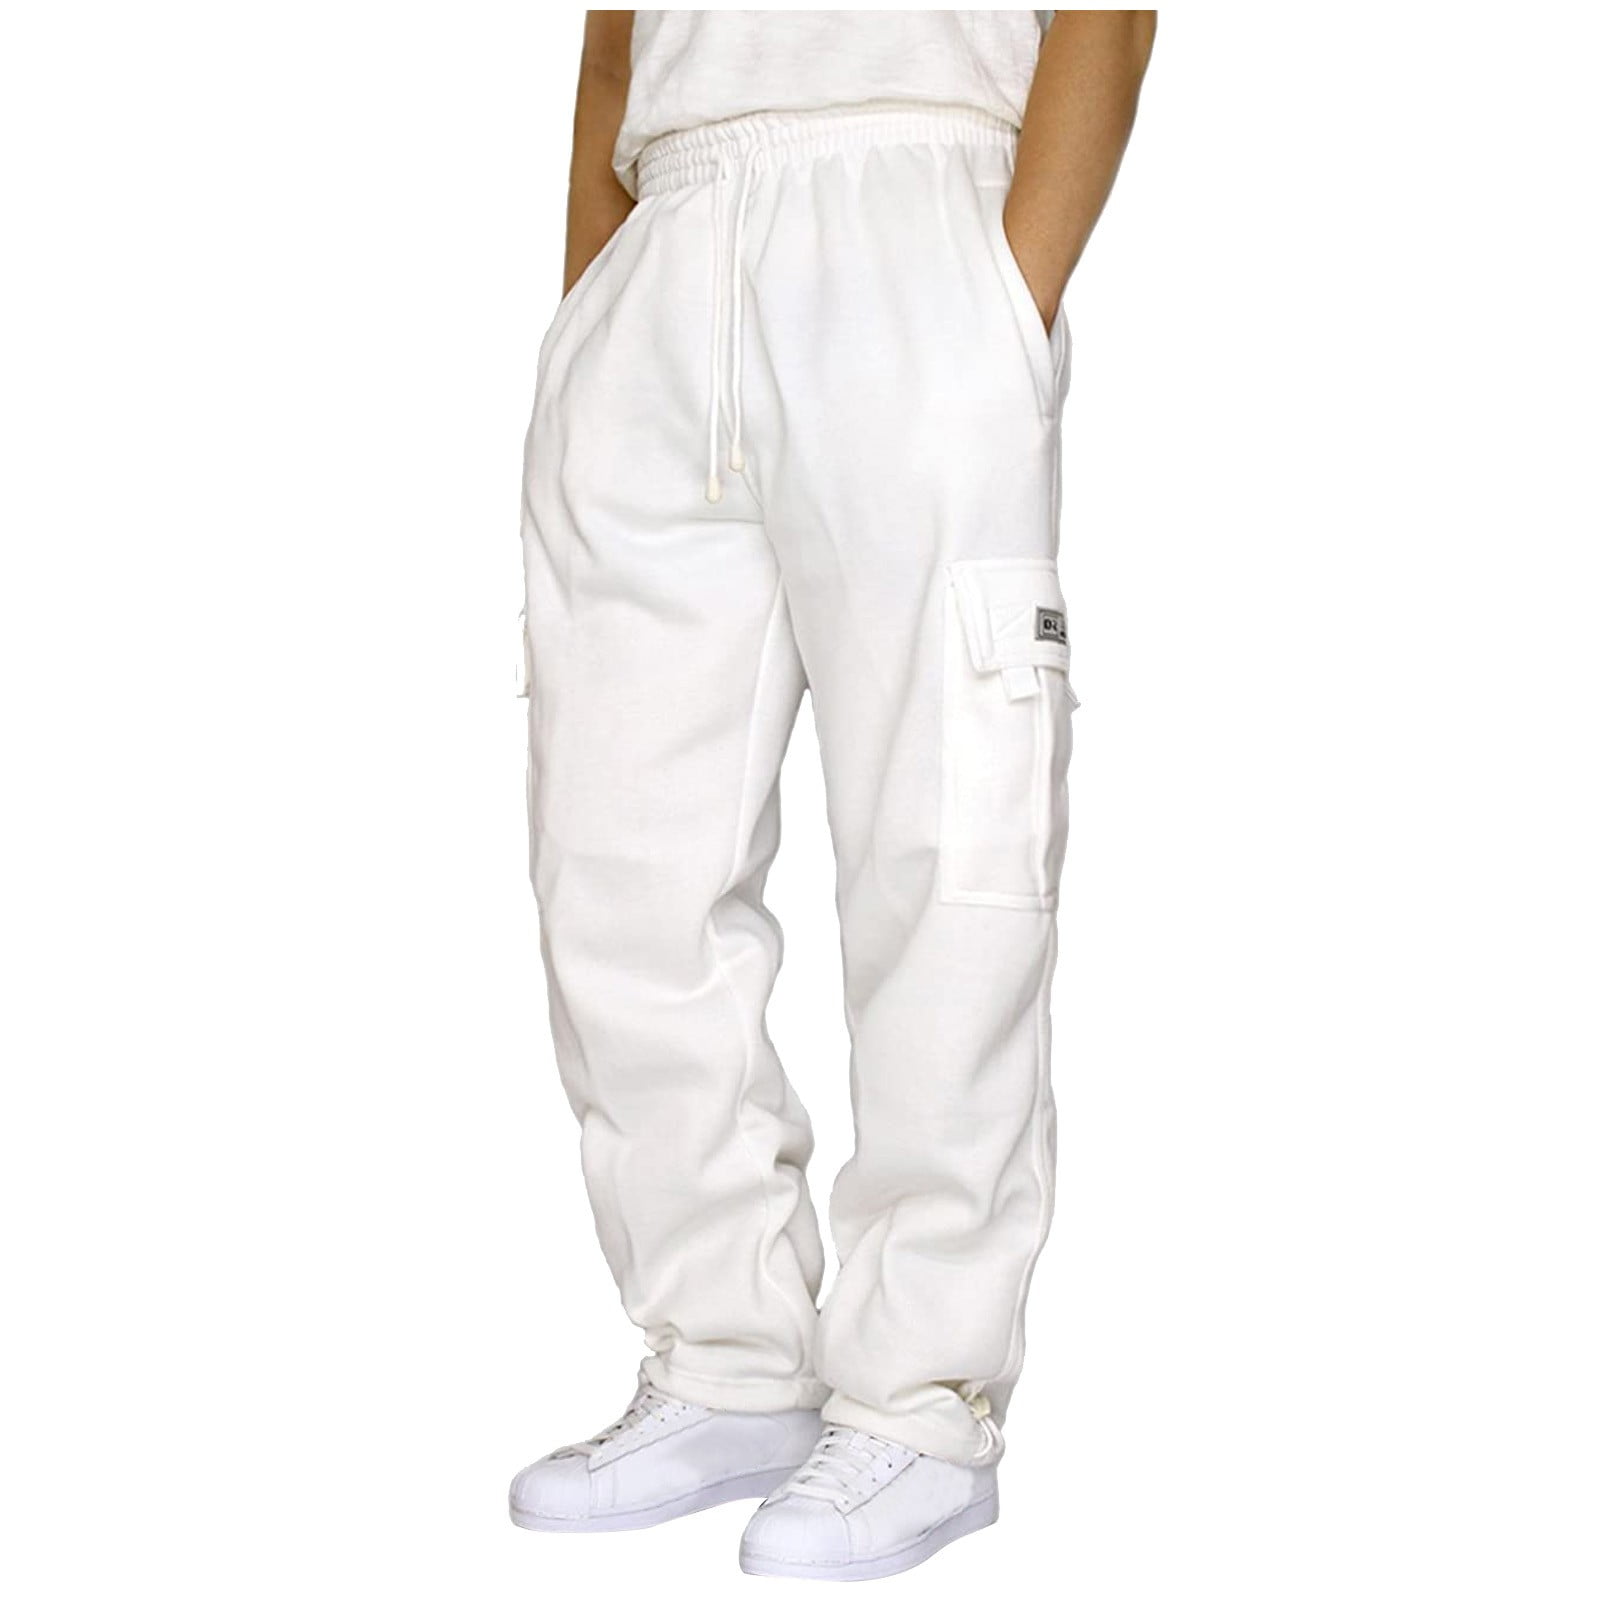 Southwest Classify Labe Relaxed Fit Cargo pants Yoga Pants Men Long Men Rope Loosening Waist Fixed  Color Pocket Pants Loose Sports Pants Elegant Pants Men Running Pants Pants  For Men White,L - Walmart.com